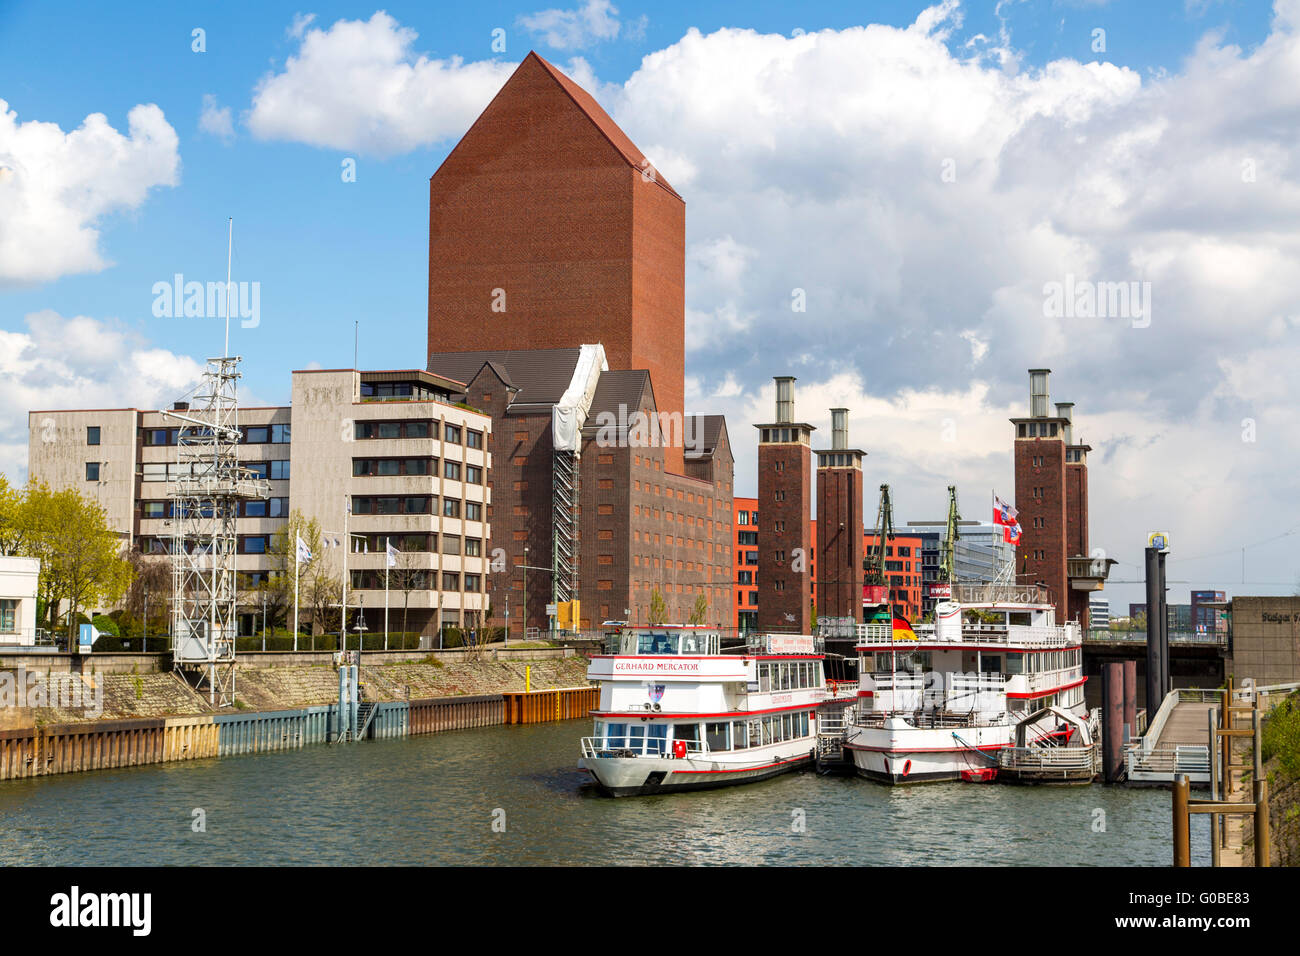 The Innenhafen, Inner Harbor Duisburg, was a central harbor at river Rhine, transformed in a cultural, office and living place, Stock Photo